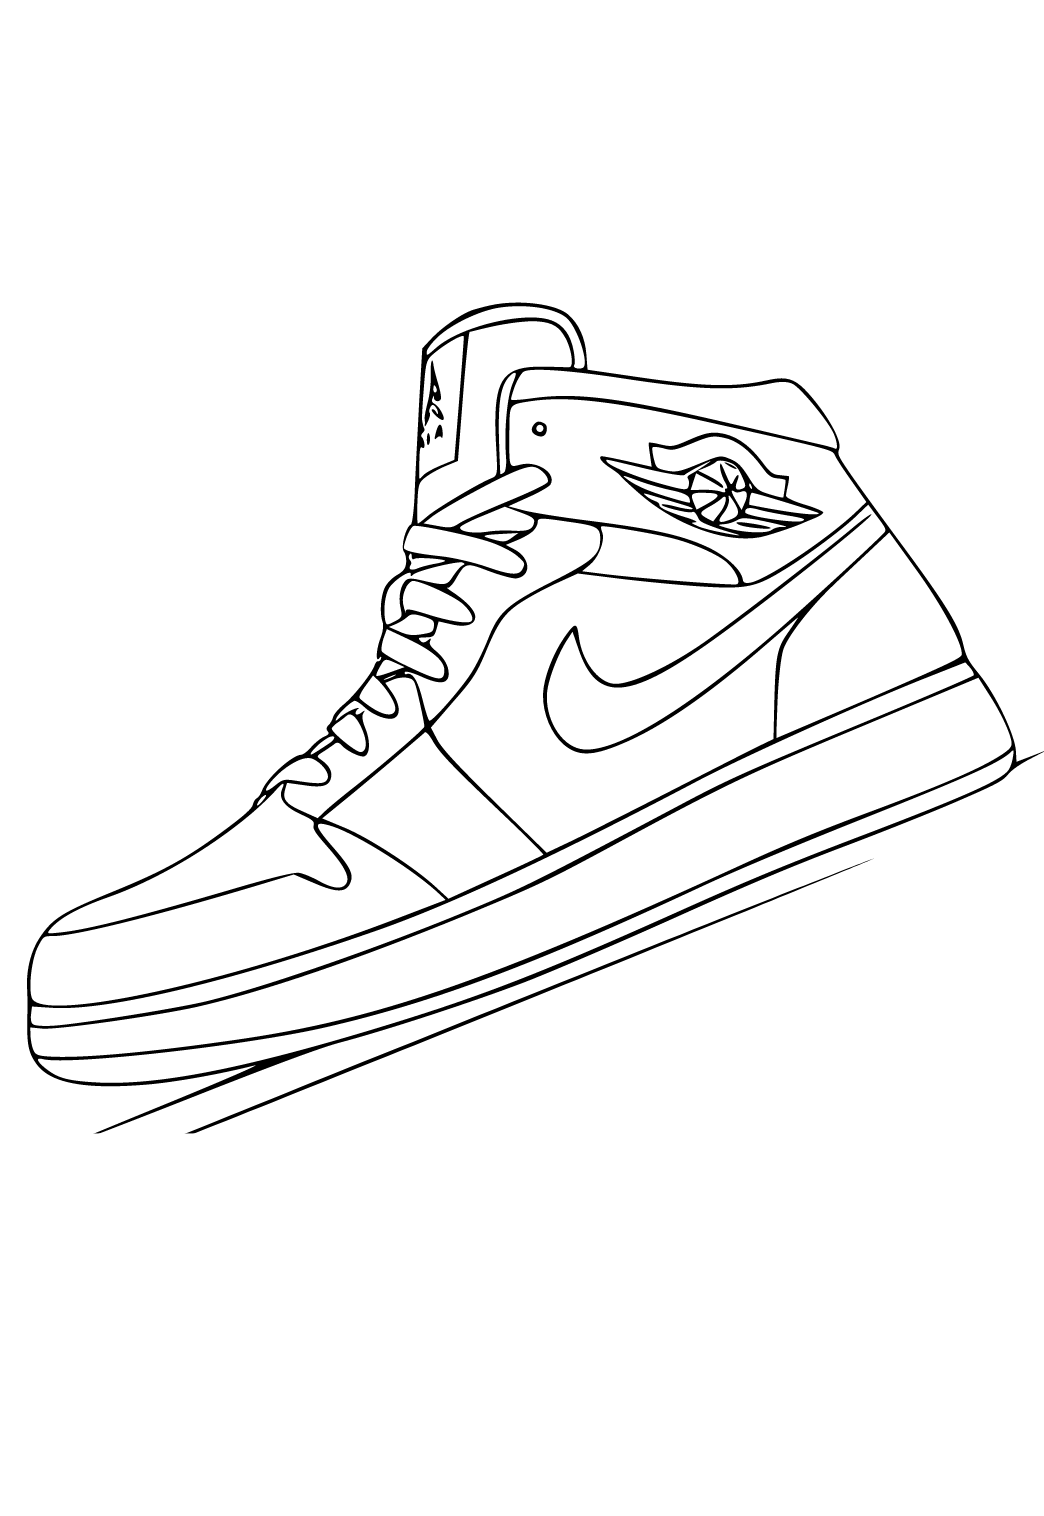 Free printable nike emblem coloring page for adults and kids